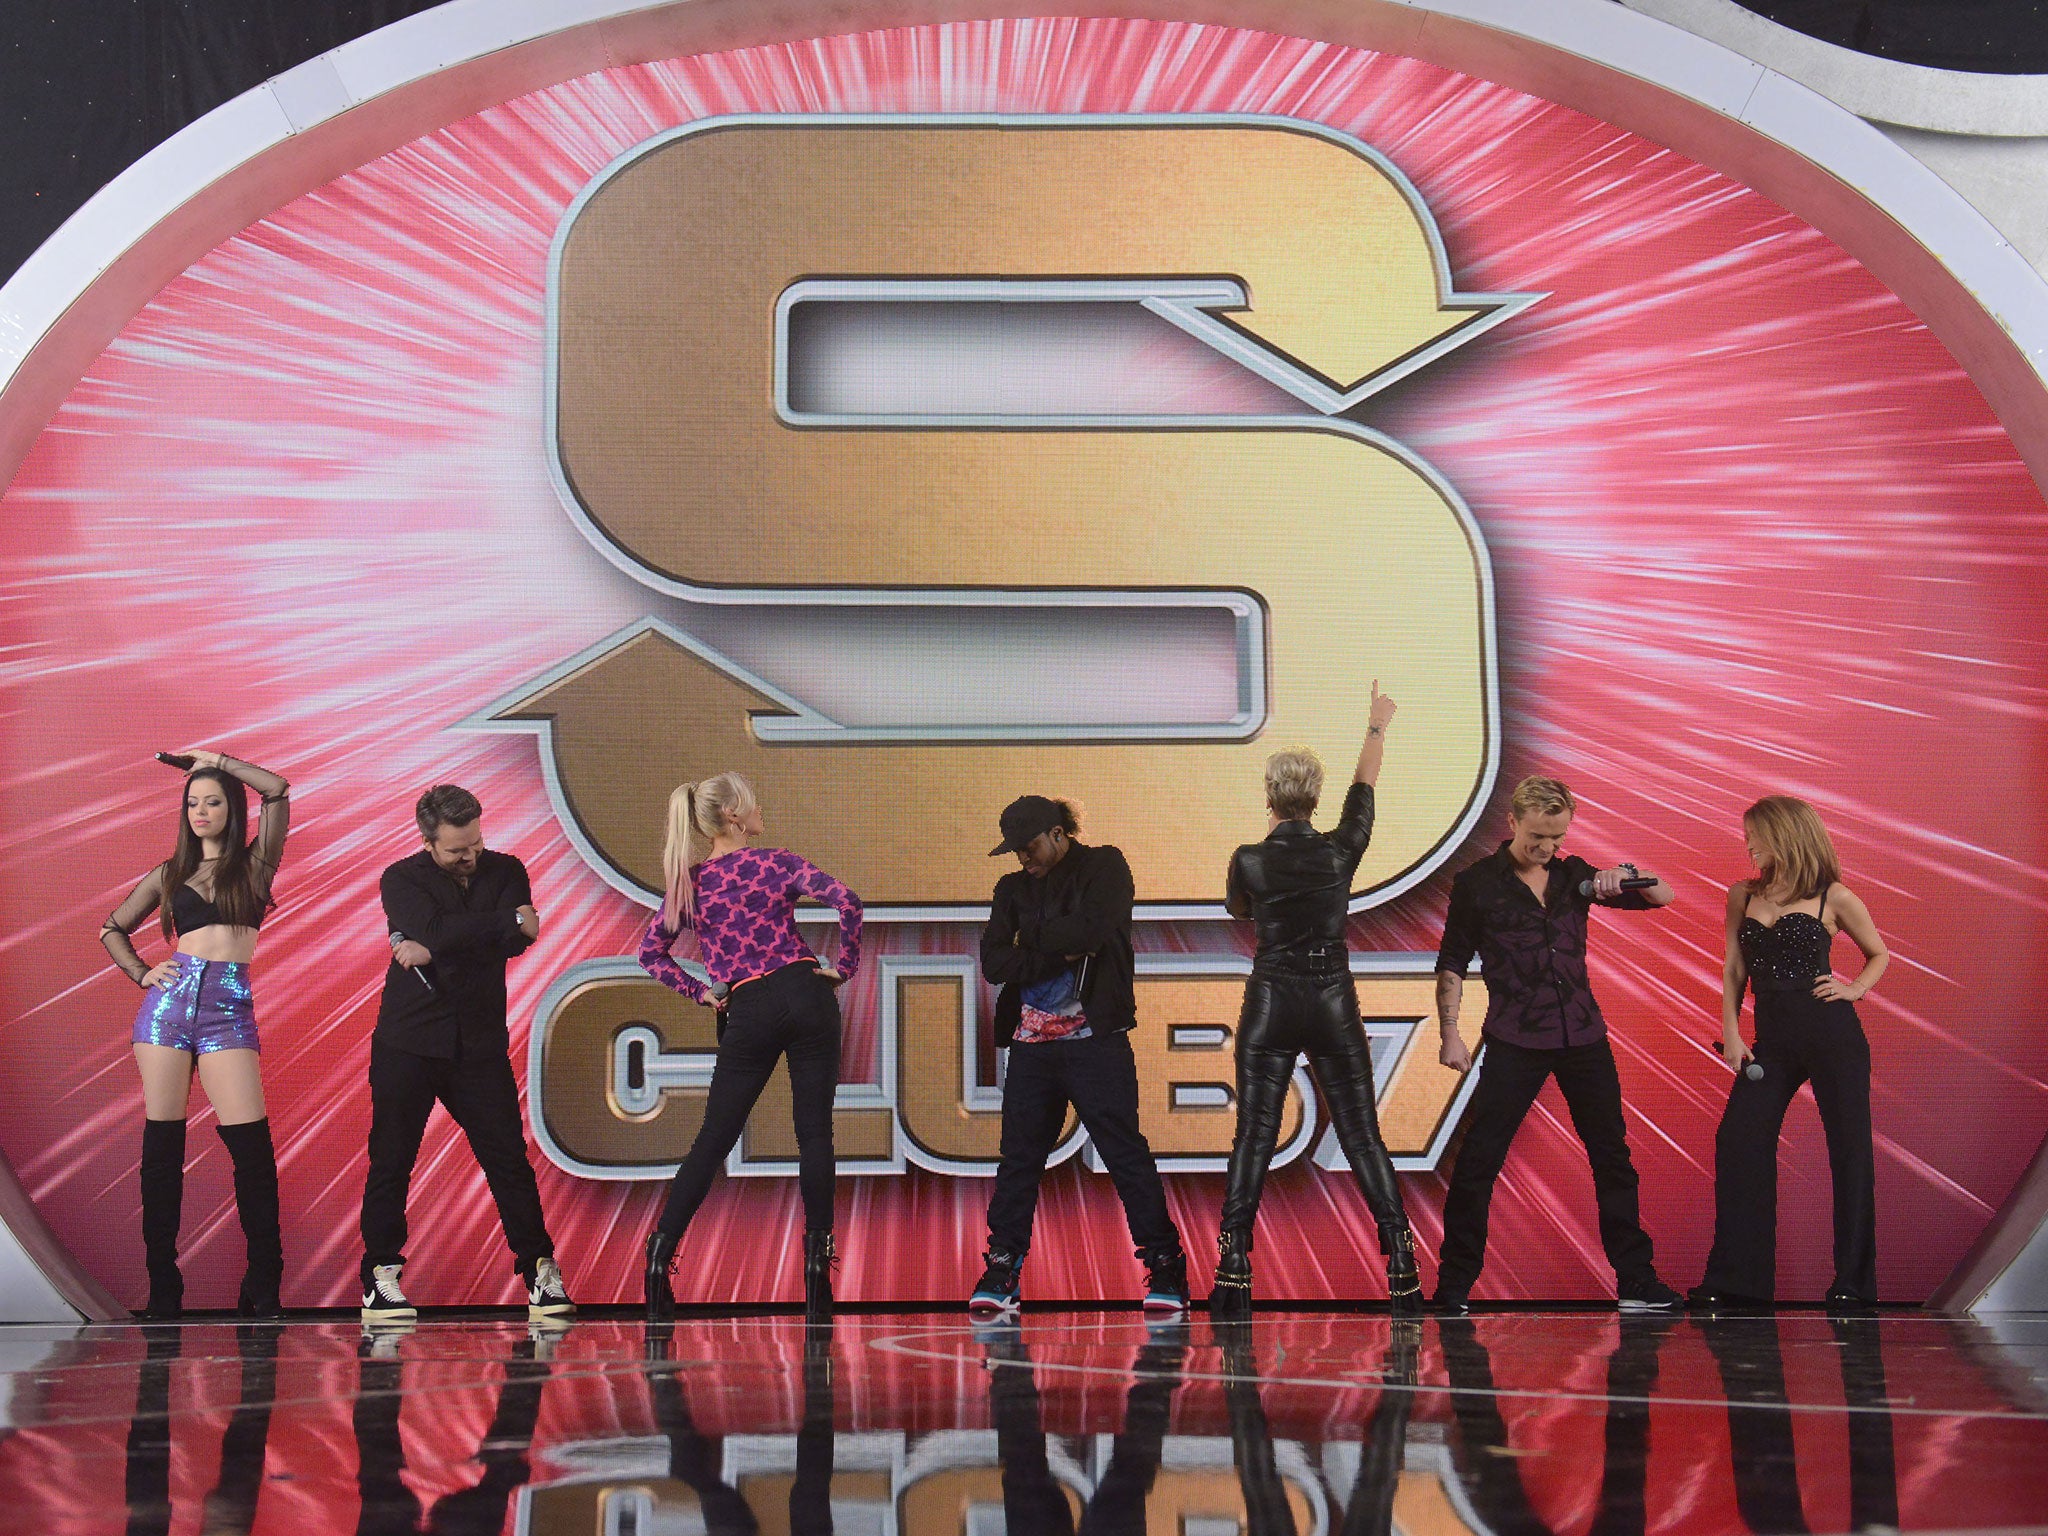 S Club 7 will are bringing it all back for a 2015 reunion tour